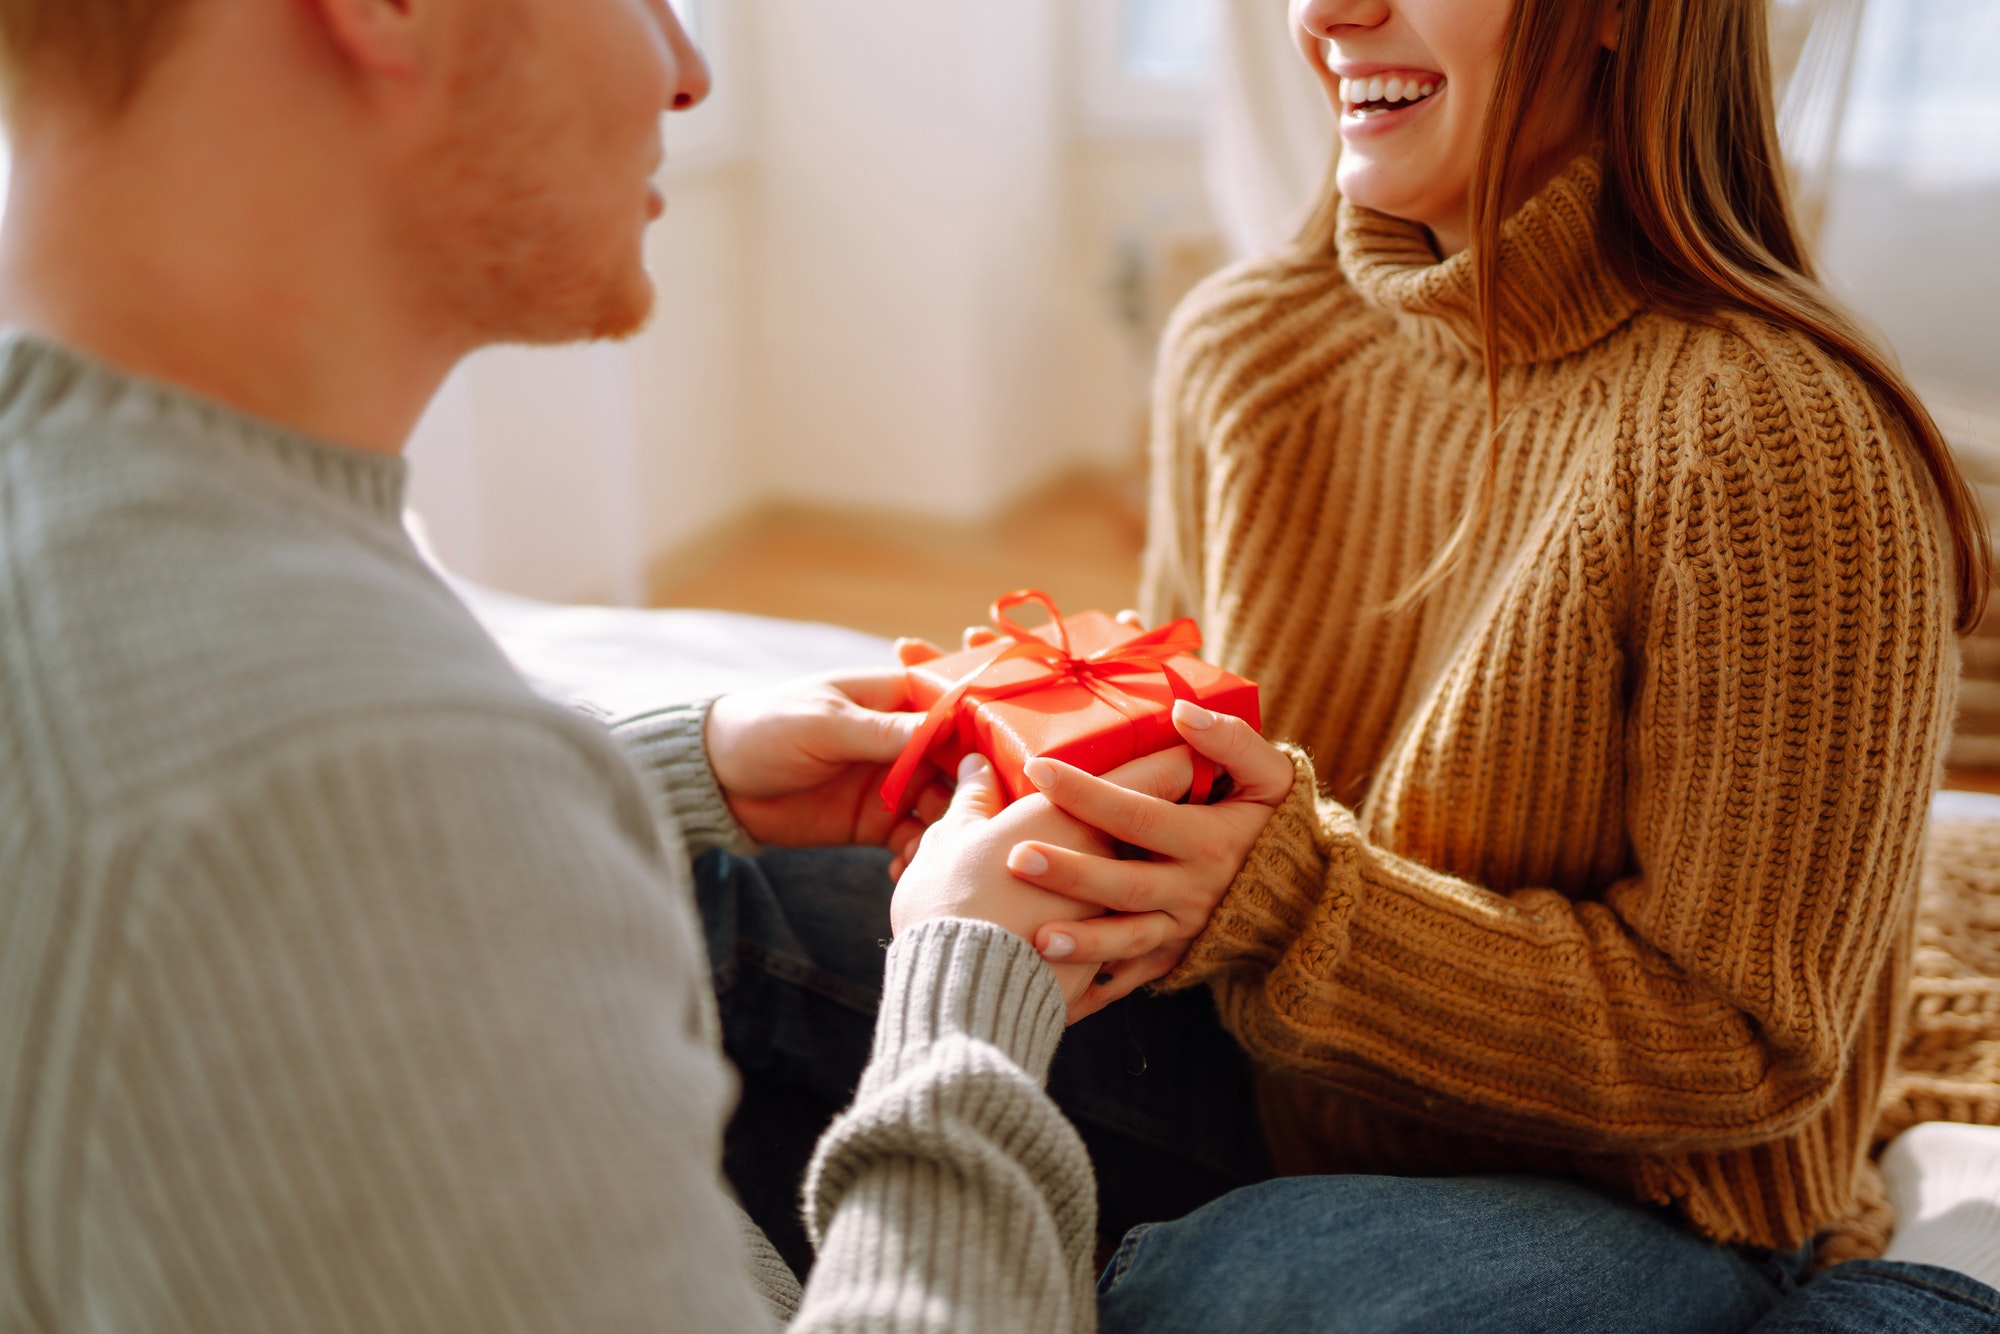 Valentine's Day concept. Exchange of gifts. Young couple at home celebrating Valentine's Day.